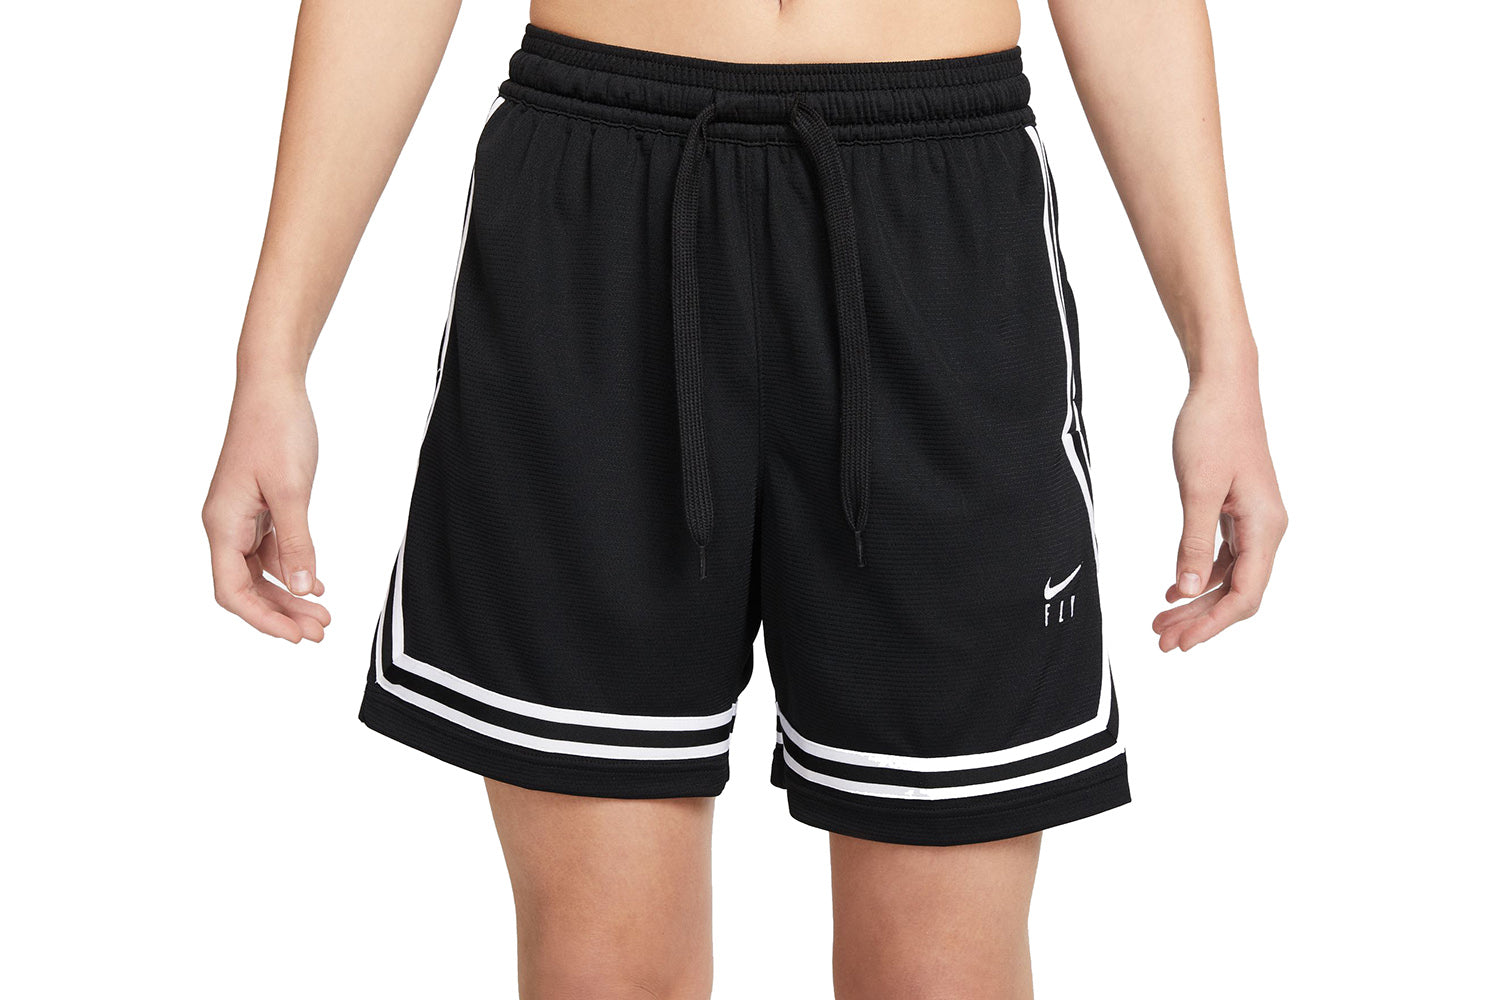 FLY CROSSOVER WOMENS BASKETBALL SHORTS